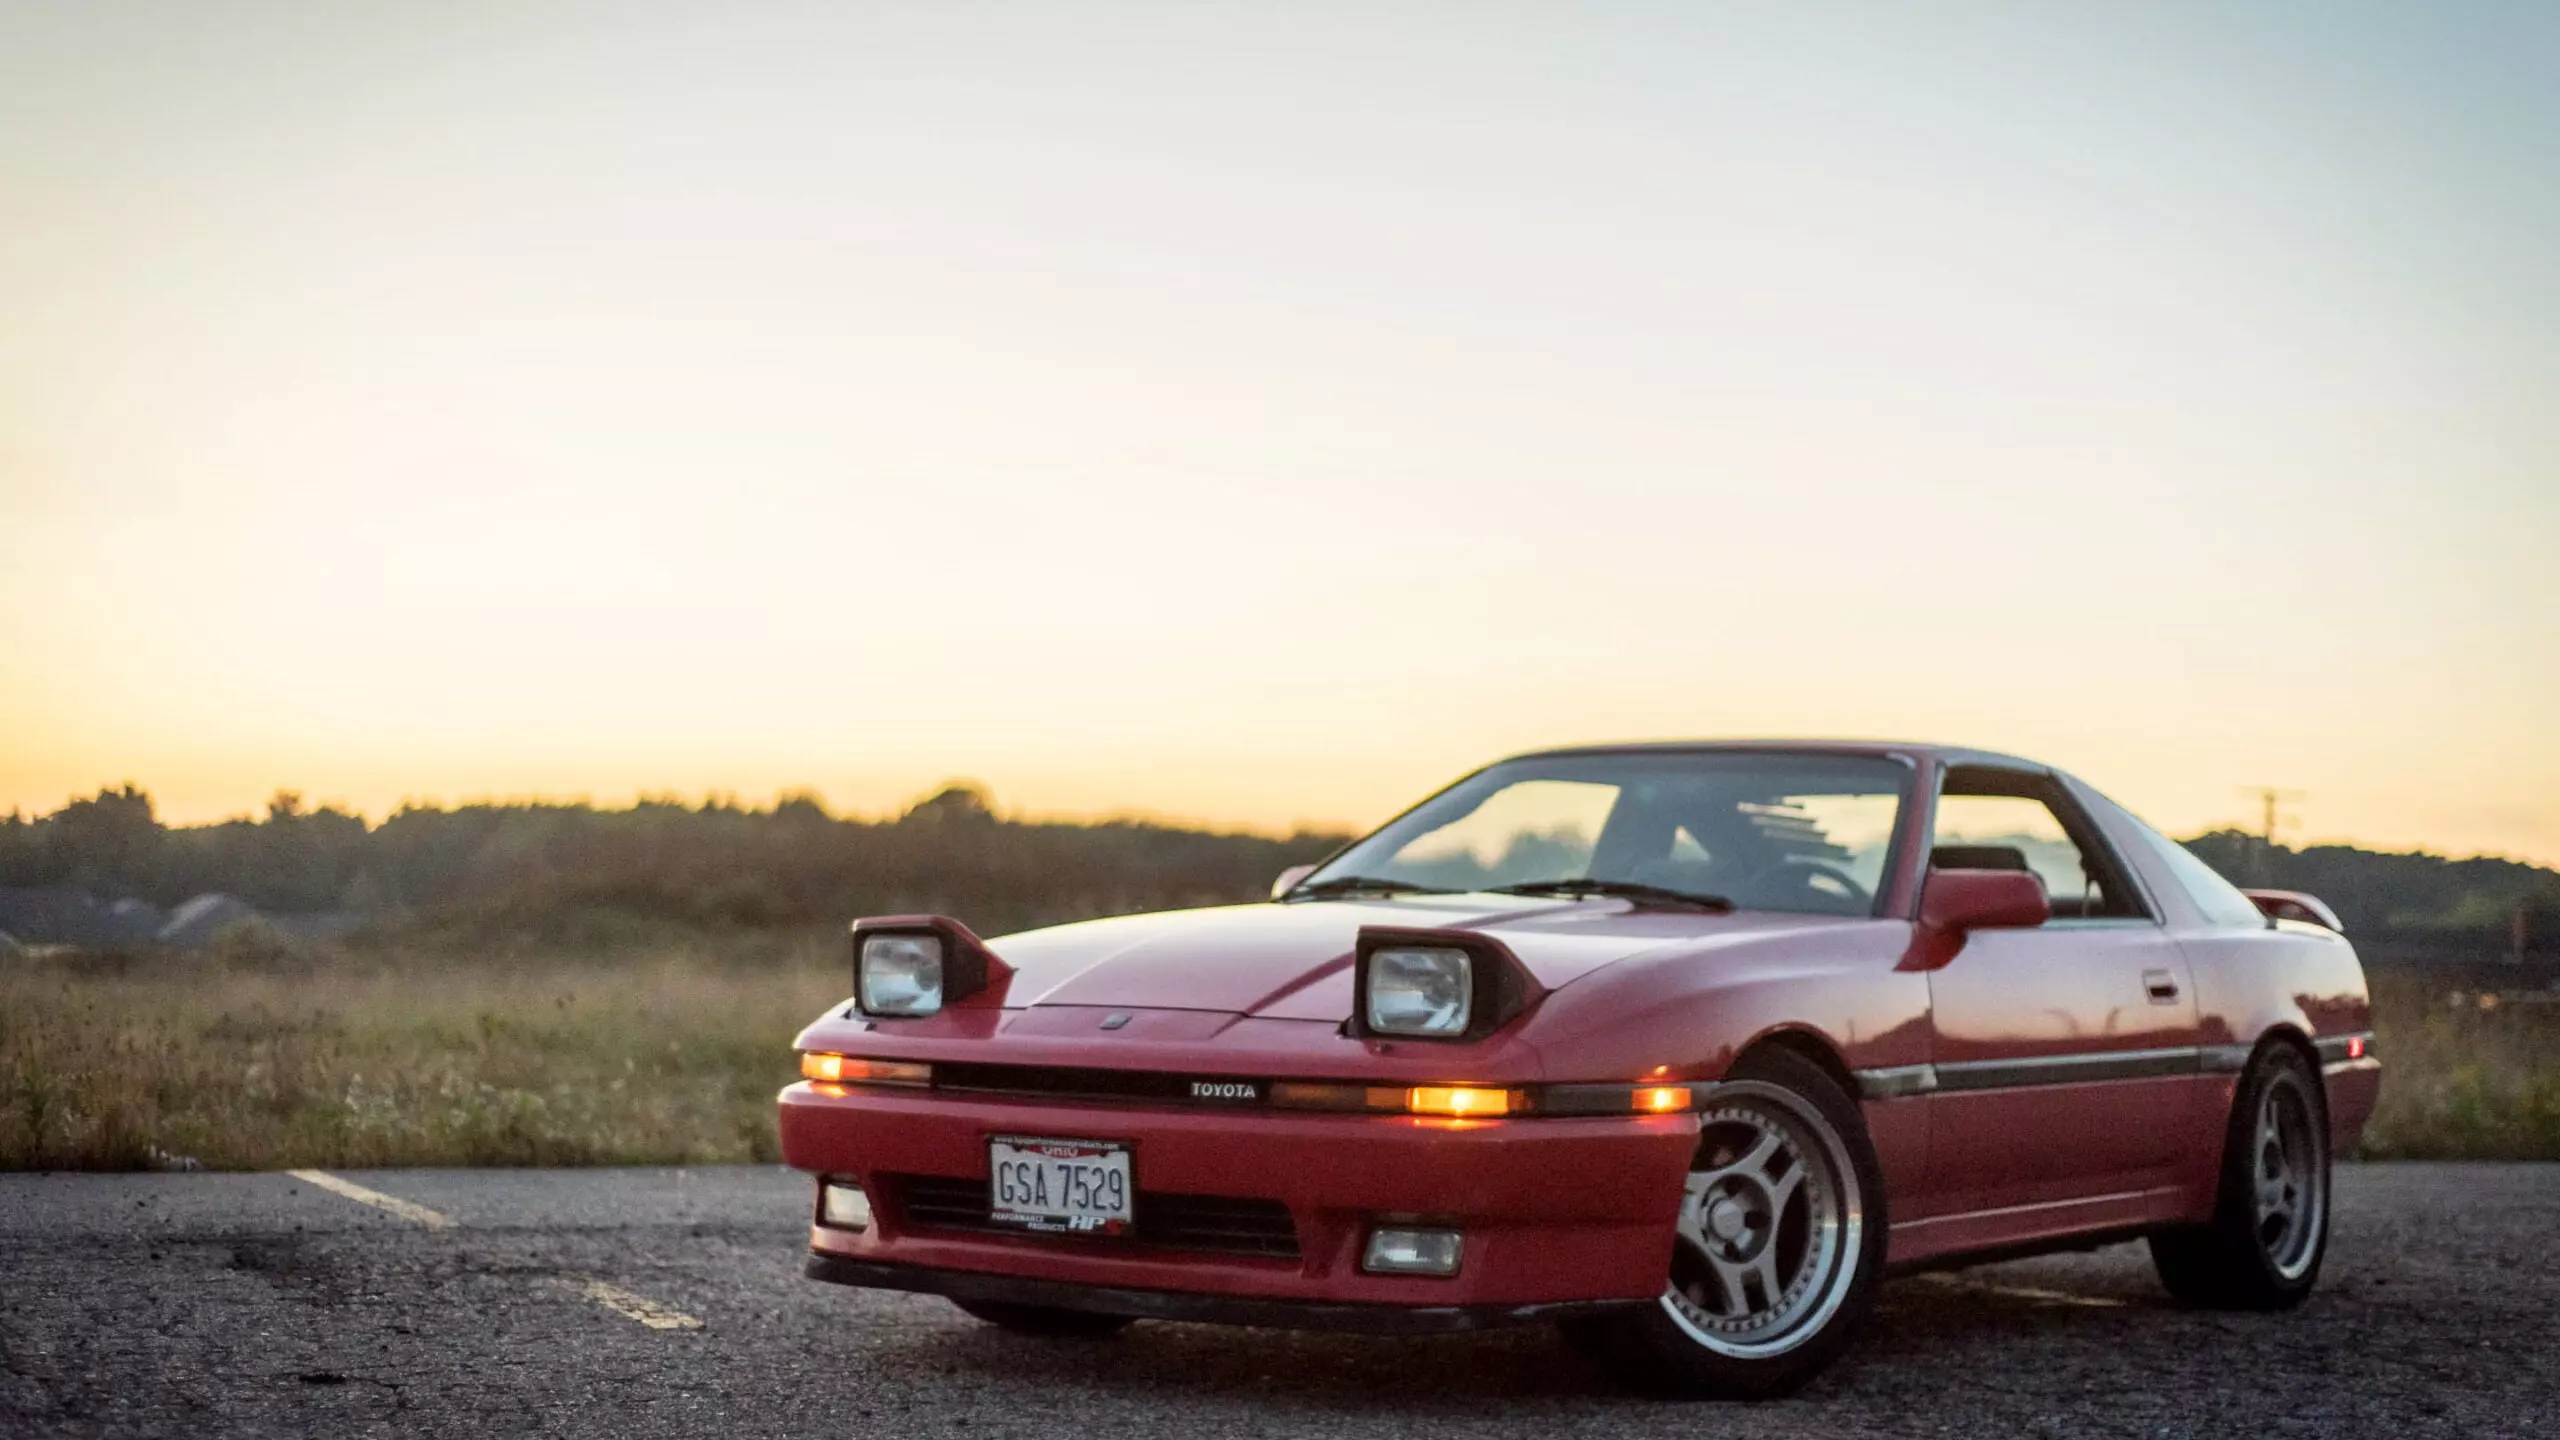 I Loved My Toyota Supra. But It Taught Me Your Car Isn&#8217;t Who You Are